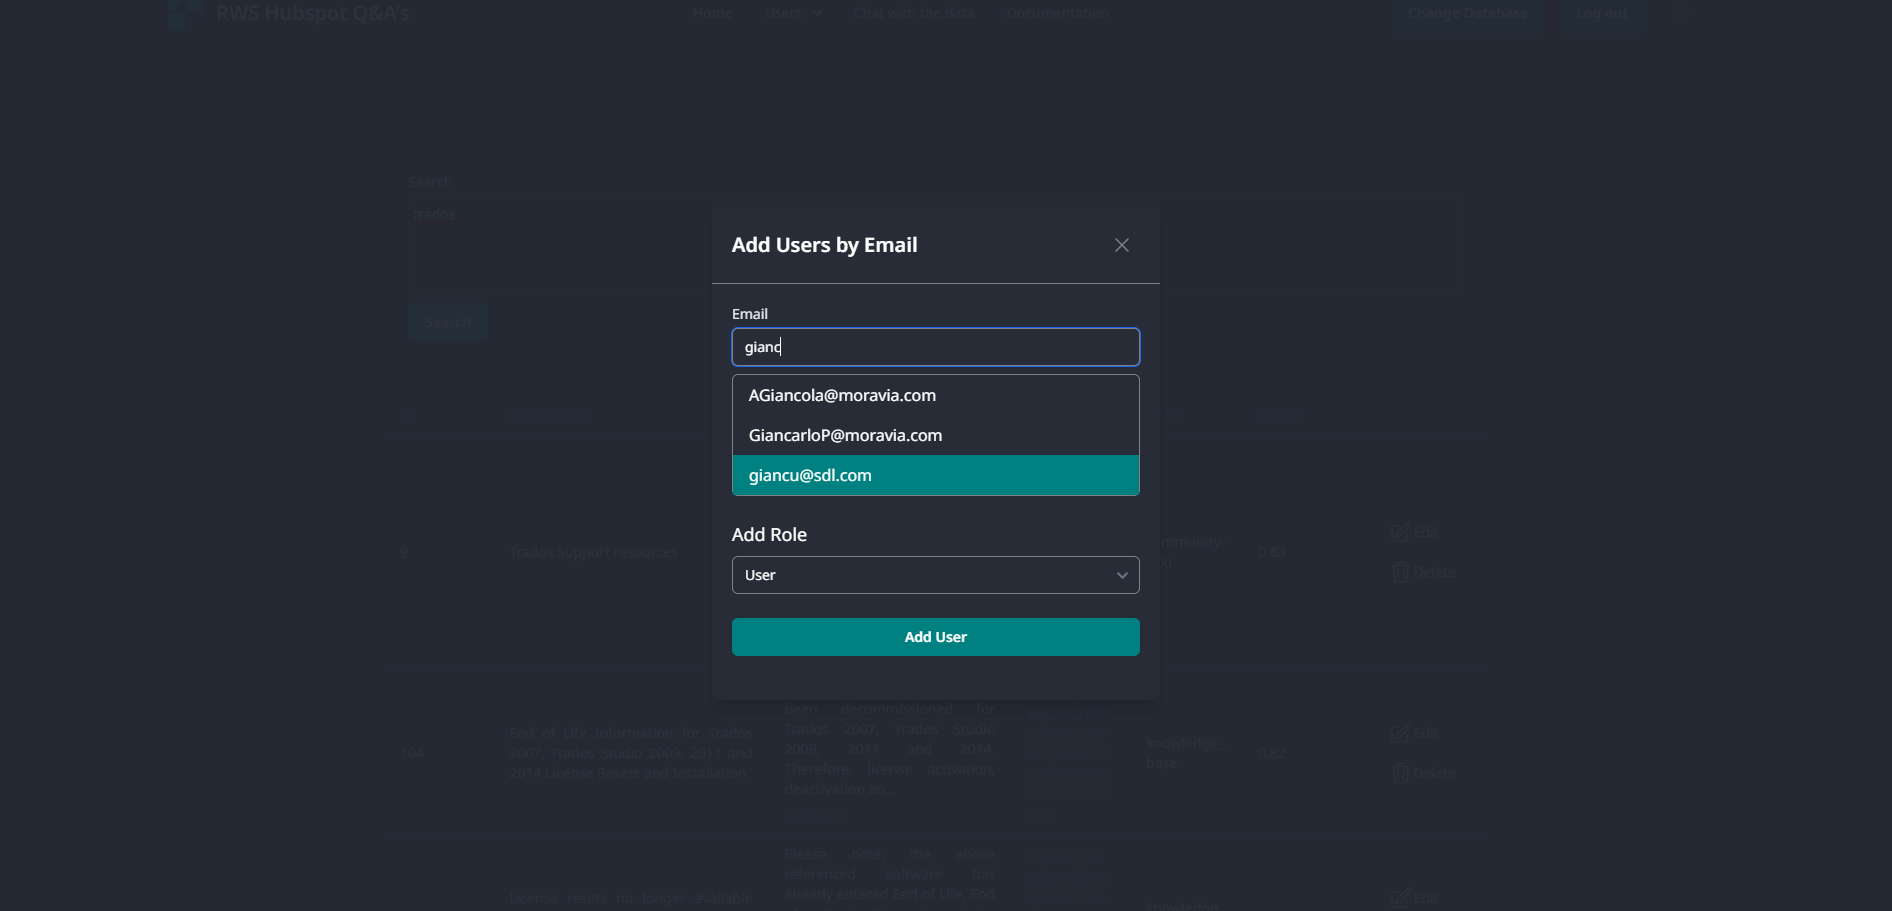 Opening the add Users modal